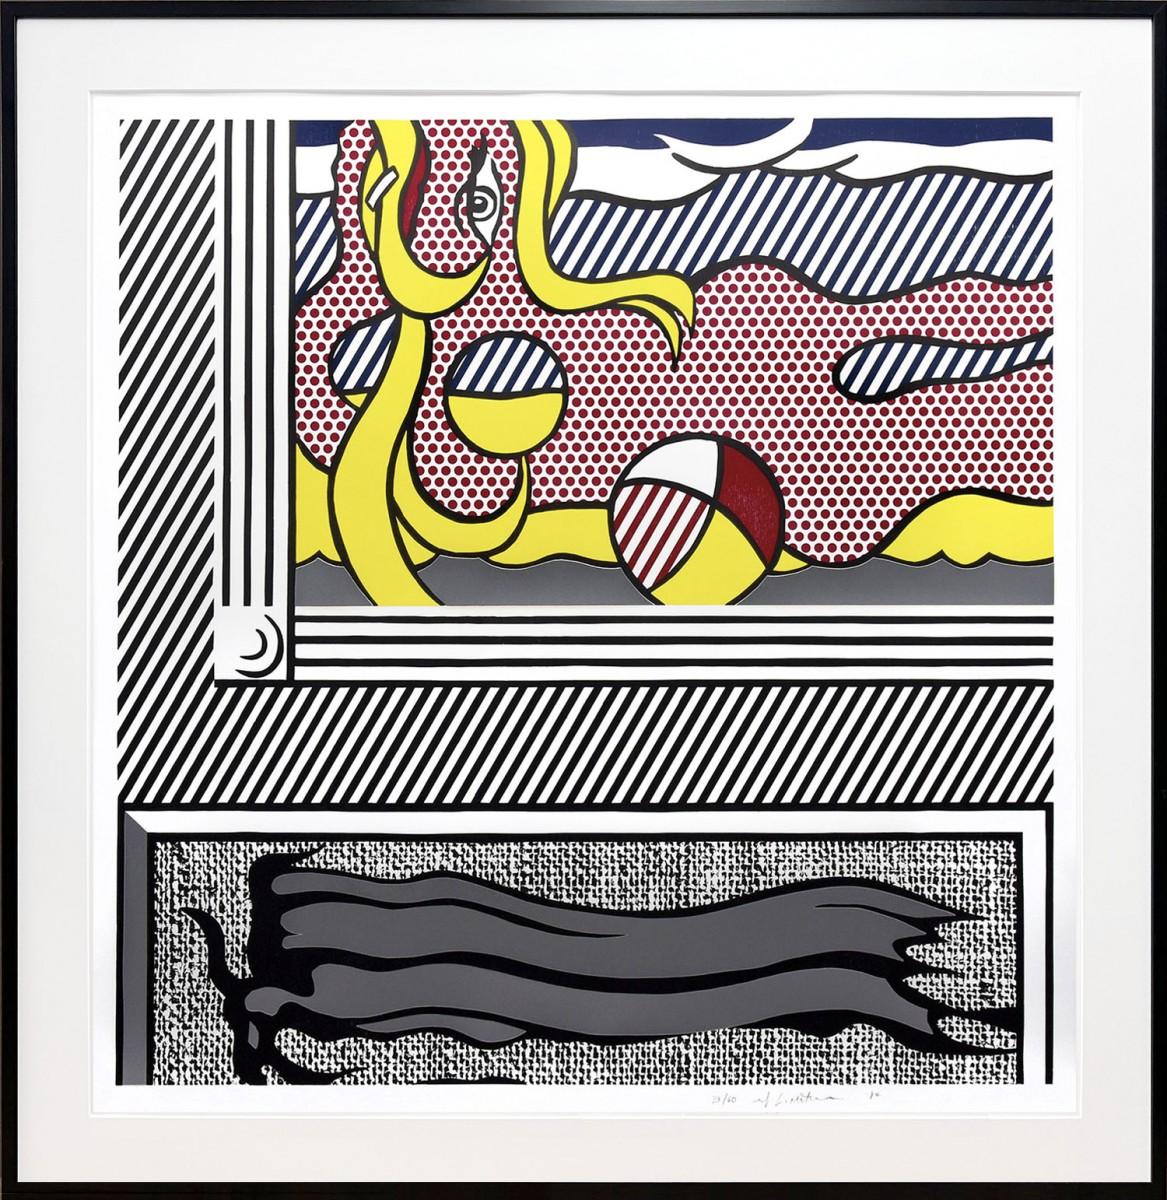 Roy Lichtenstein Two Paintings: Beach Ball, from Paintings Series, 1984 uses his signature patterns and lines to create various visual implications. Straight lines are used to emphasize the shape of the two different frames, whereas the diagonal